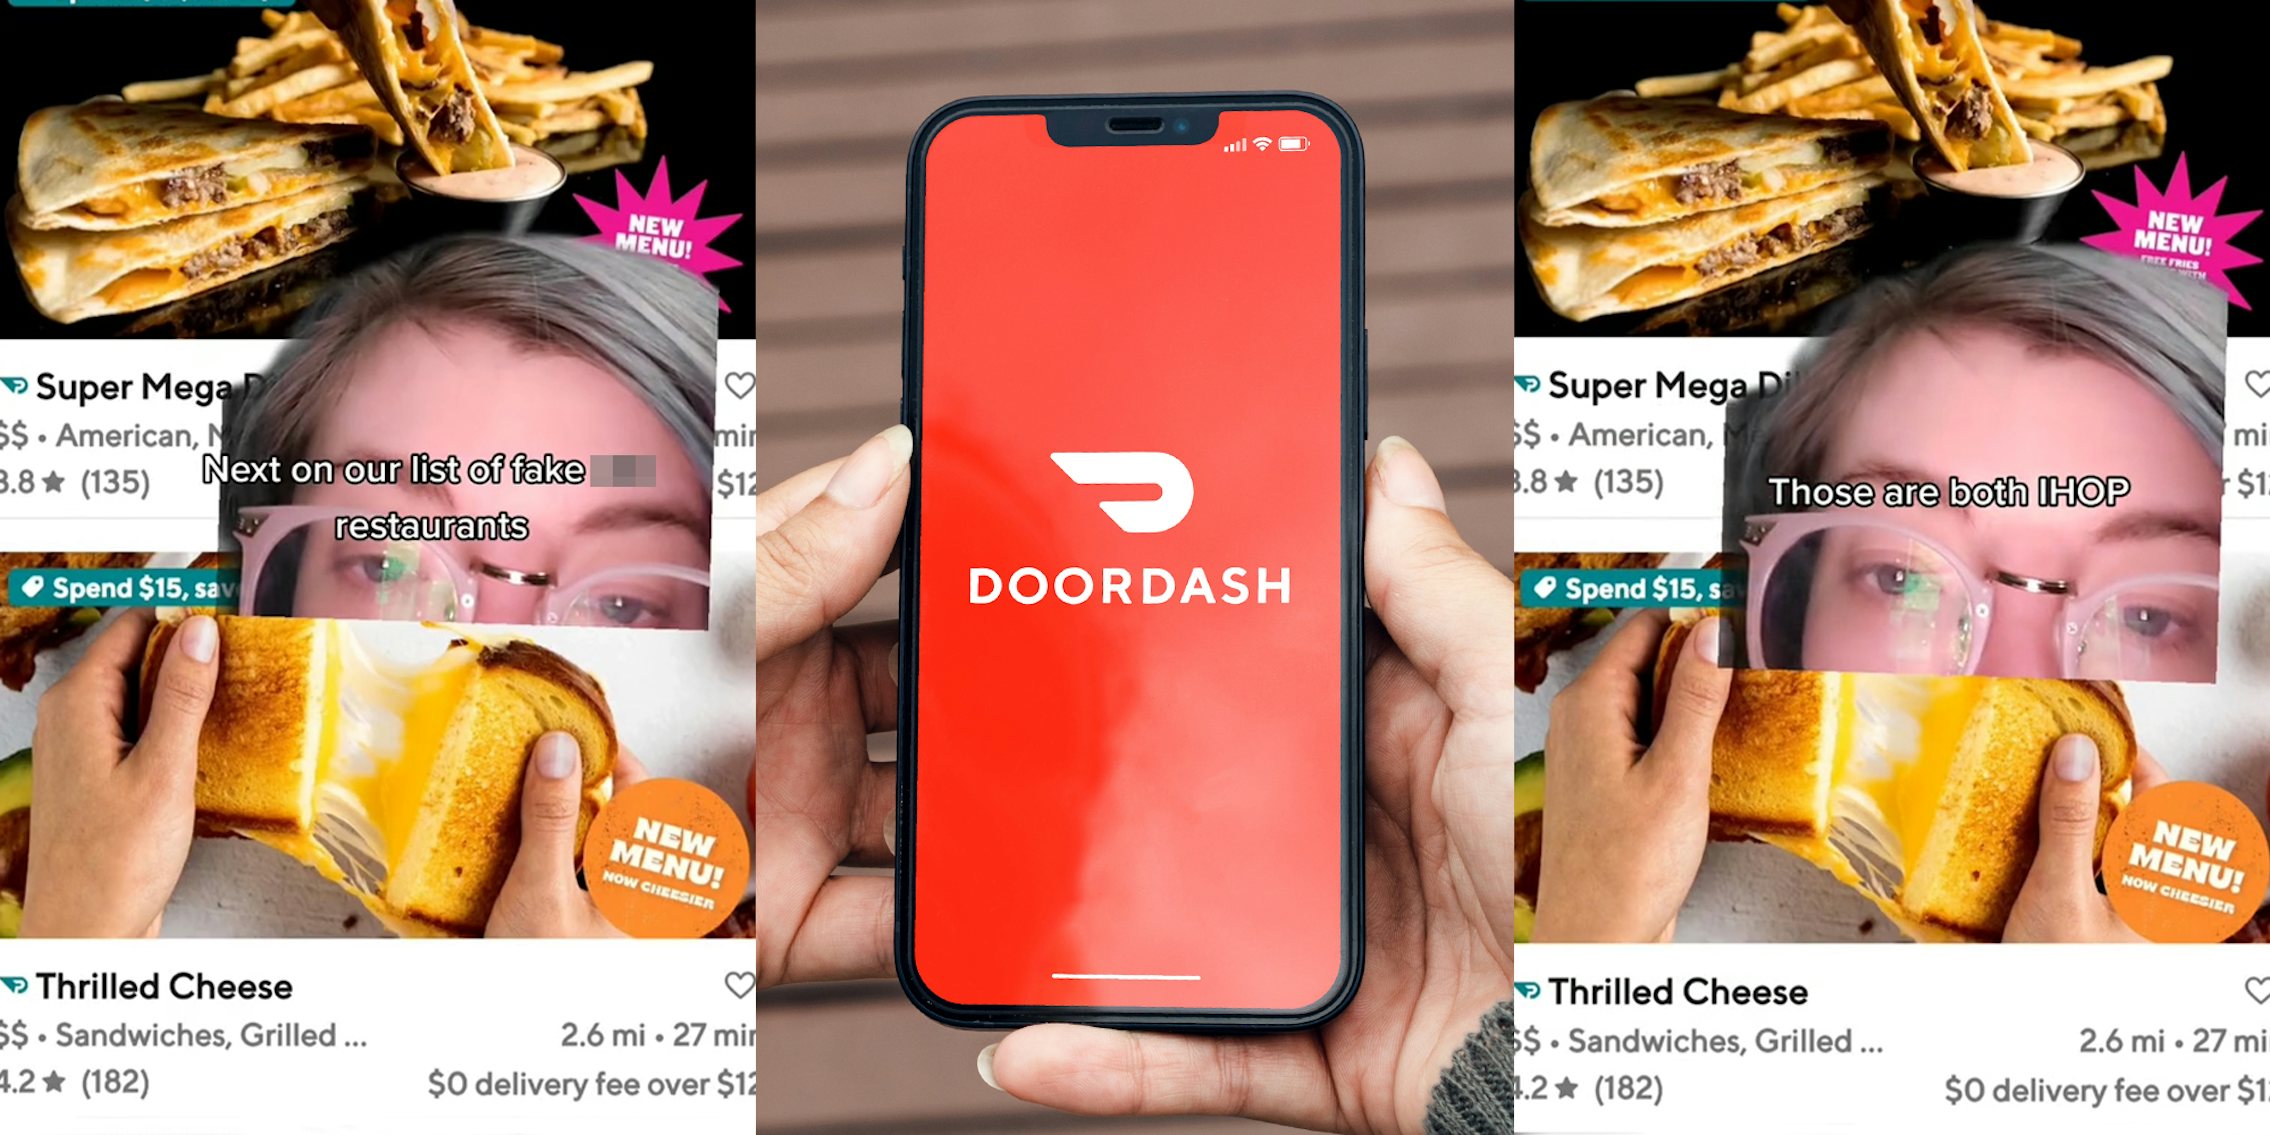 person greenscreen TikTok over DoorDash listings with caption 'Next on our list of fake blank restaurants' (l) DoorDash on phone in hands in front of wooden background (c) person greenscreen TikTok over DoorDash listings with caption 'Those are both IHOP' (r)